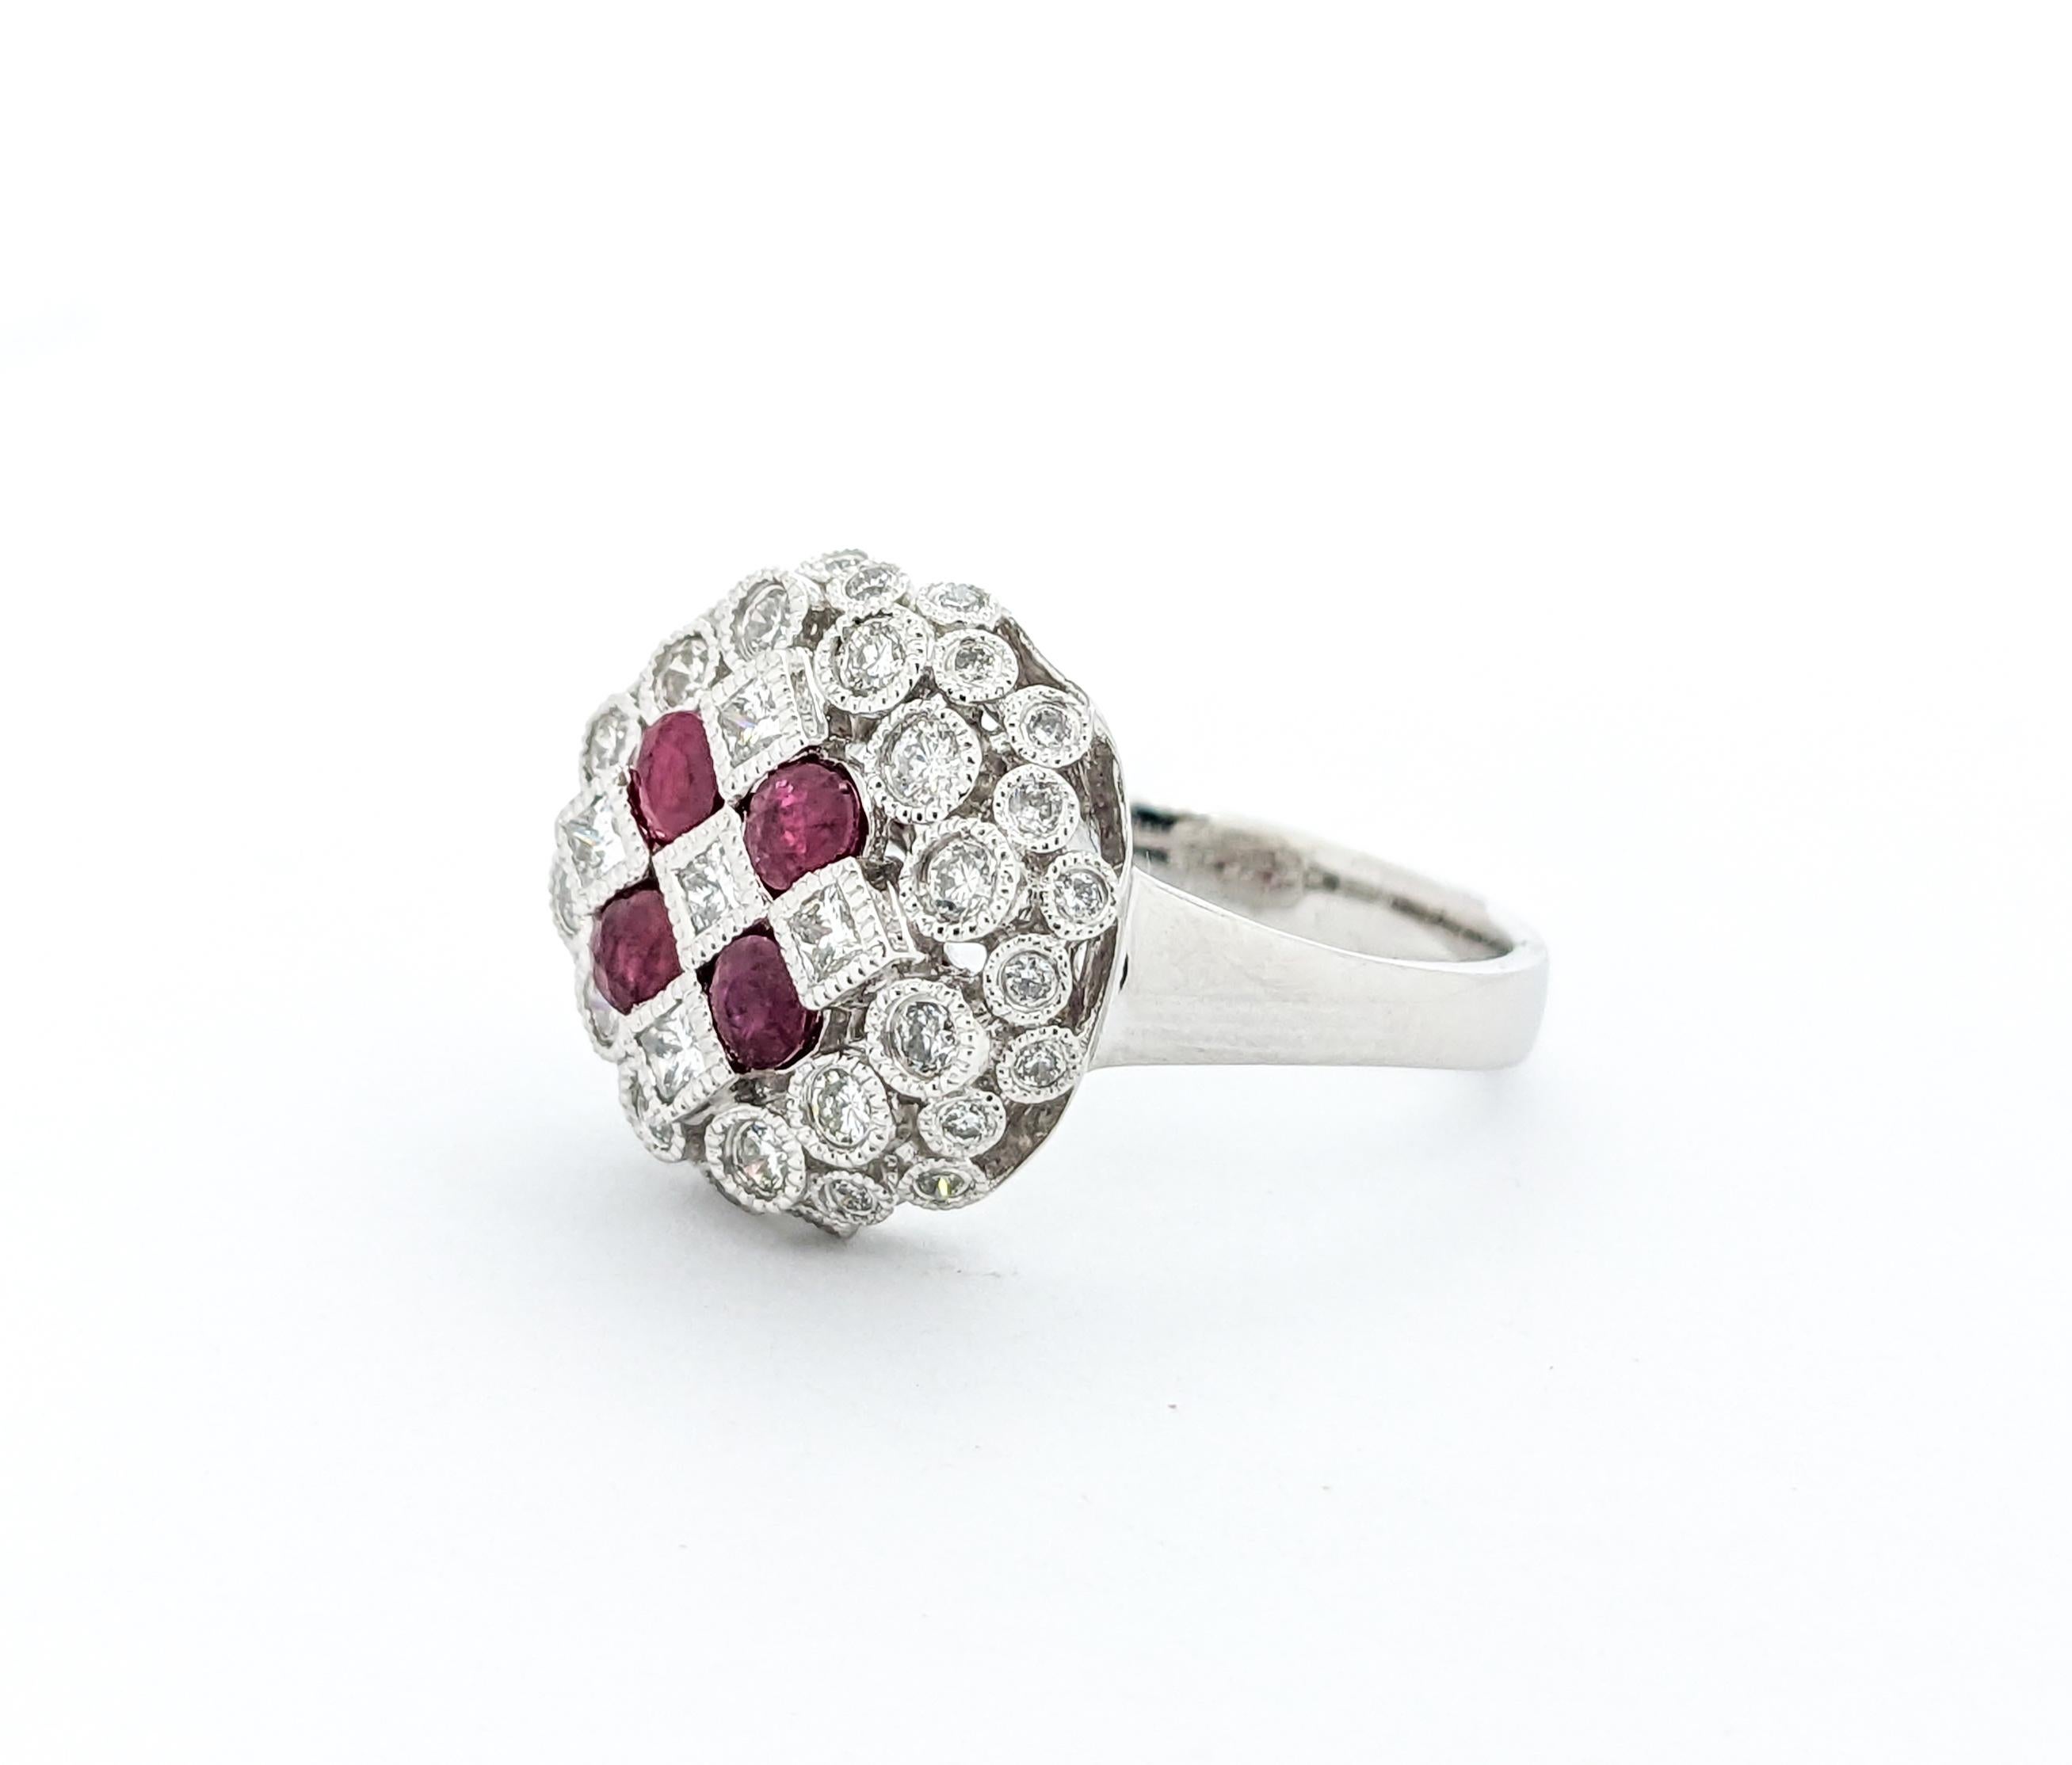 Bezel Set Diamond & Rubies Ring In Platinum In Excellent Condition For Sale In Bloomington, MN